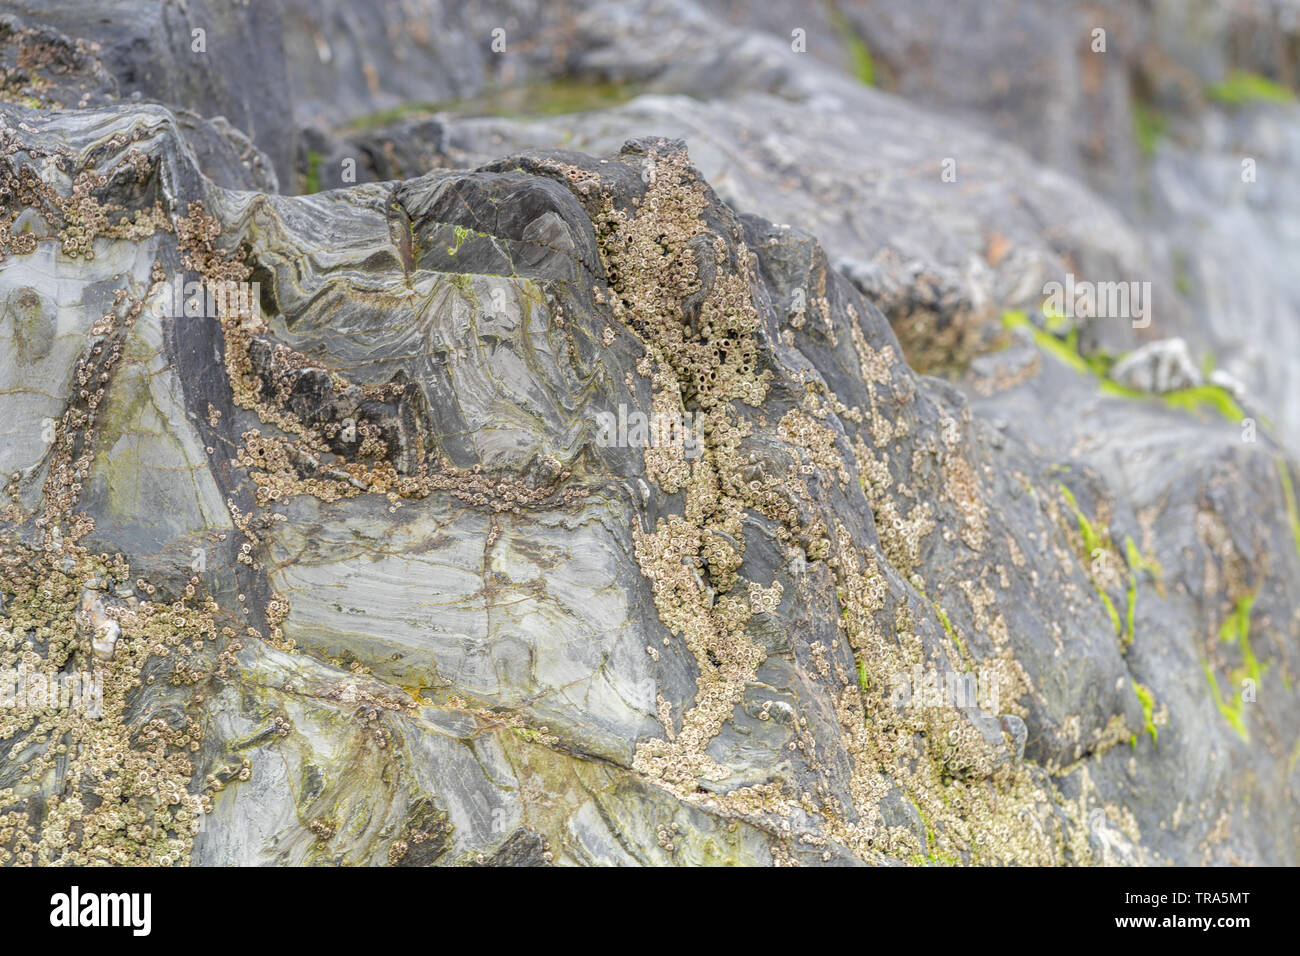 Rock Limestone with barnacle formations Stock Photo